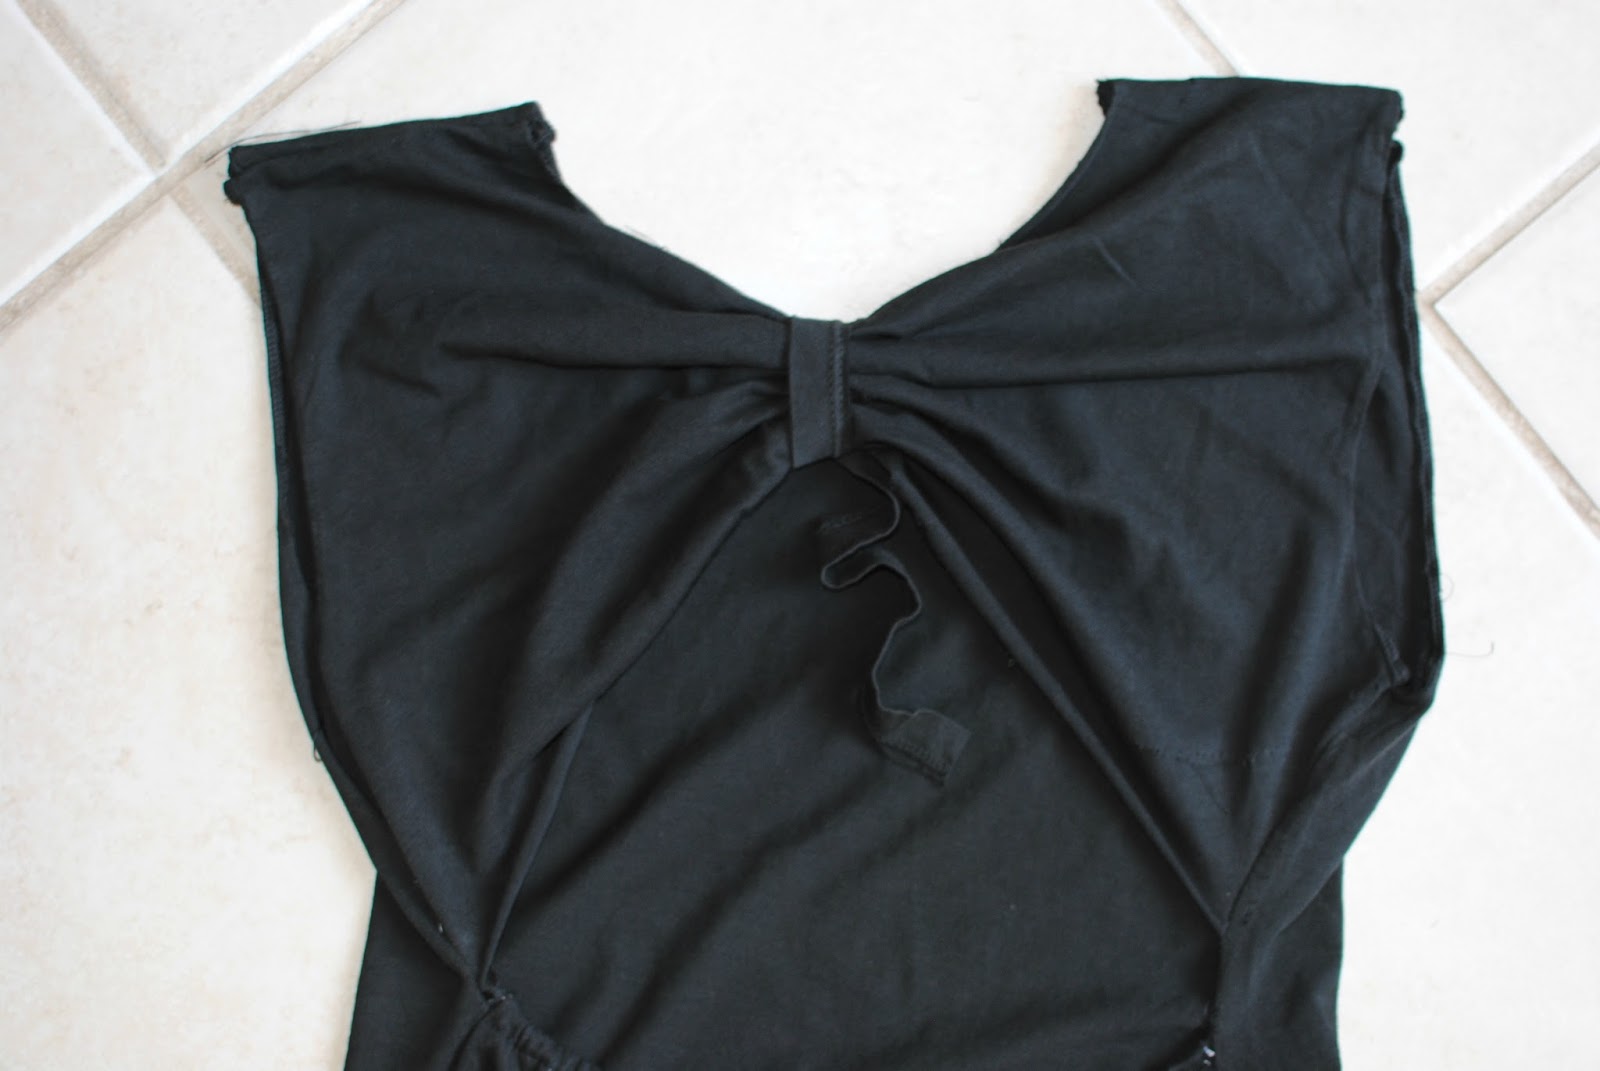 DIY bow back dress from men's shirt | Trash To Couture | Bloglovin’